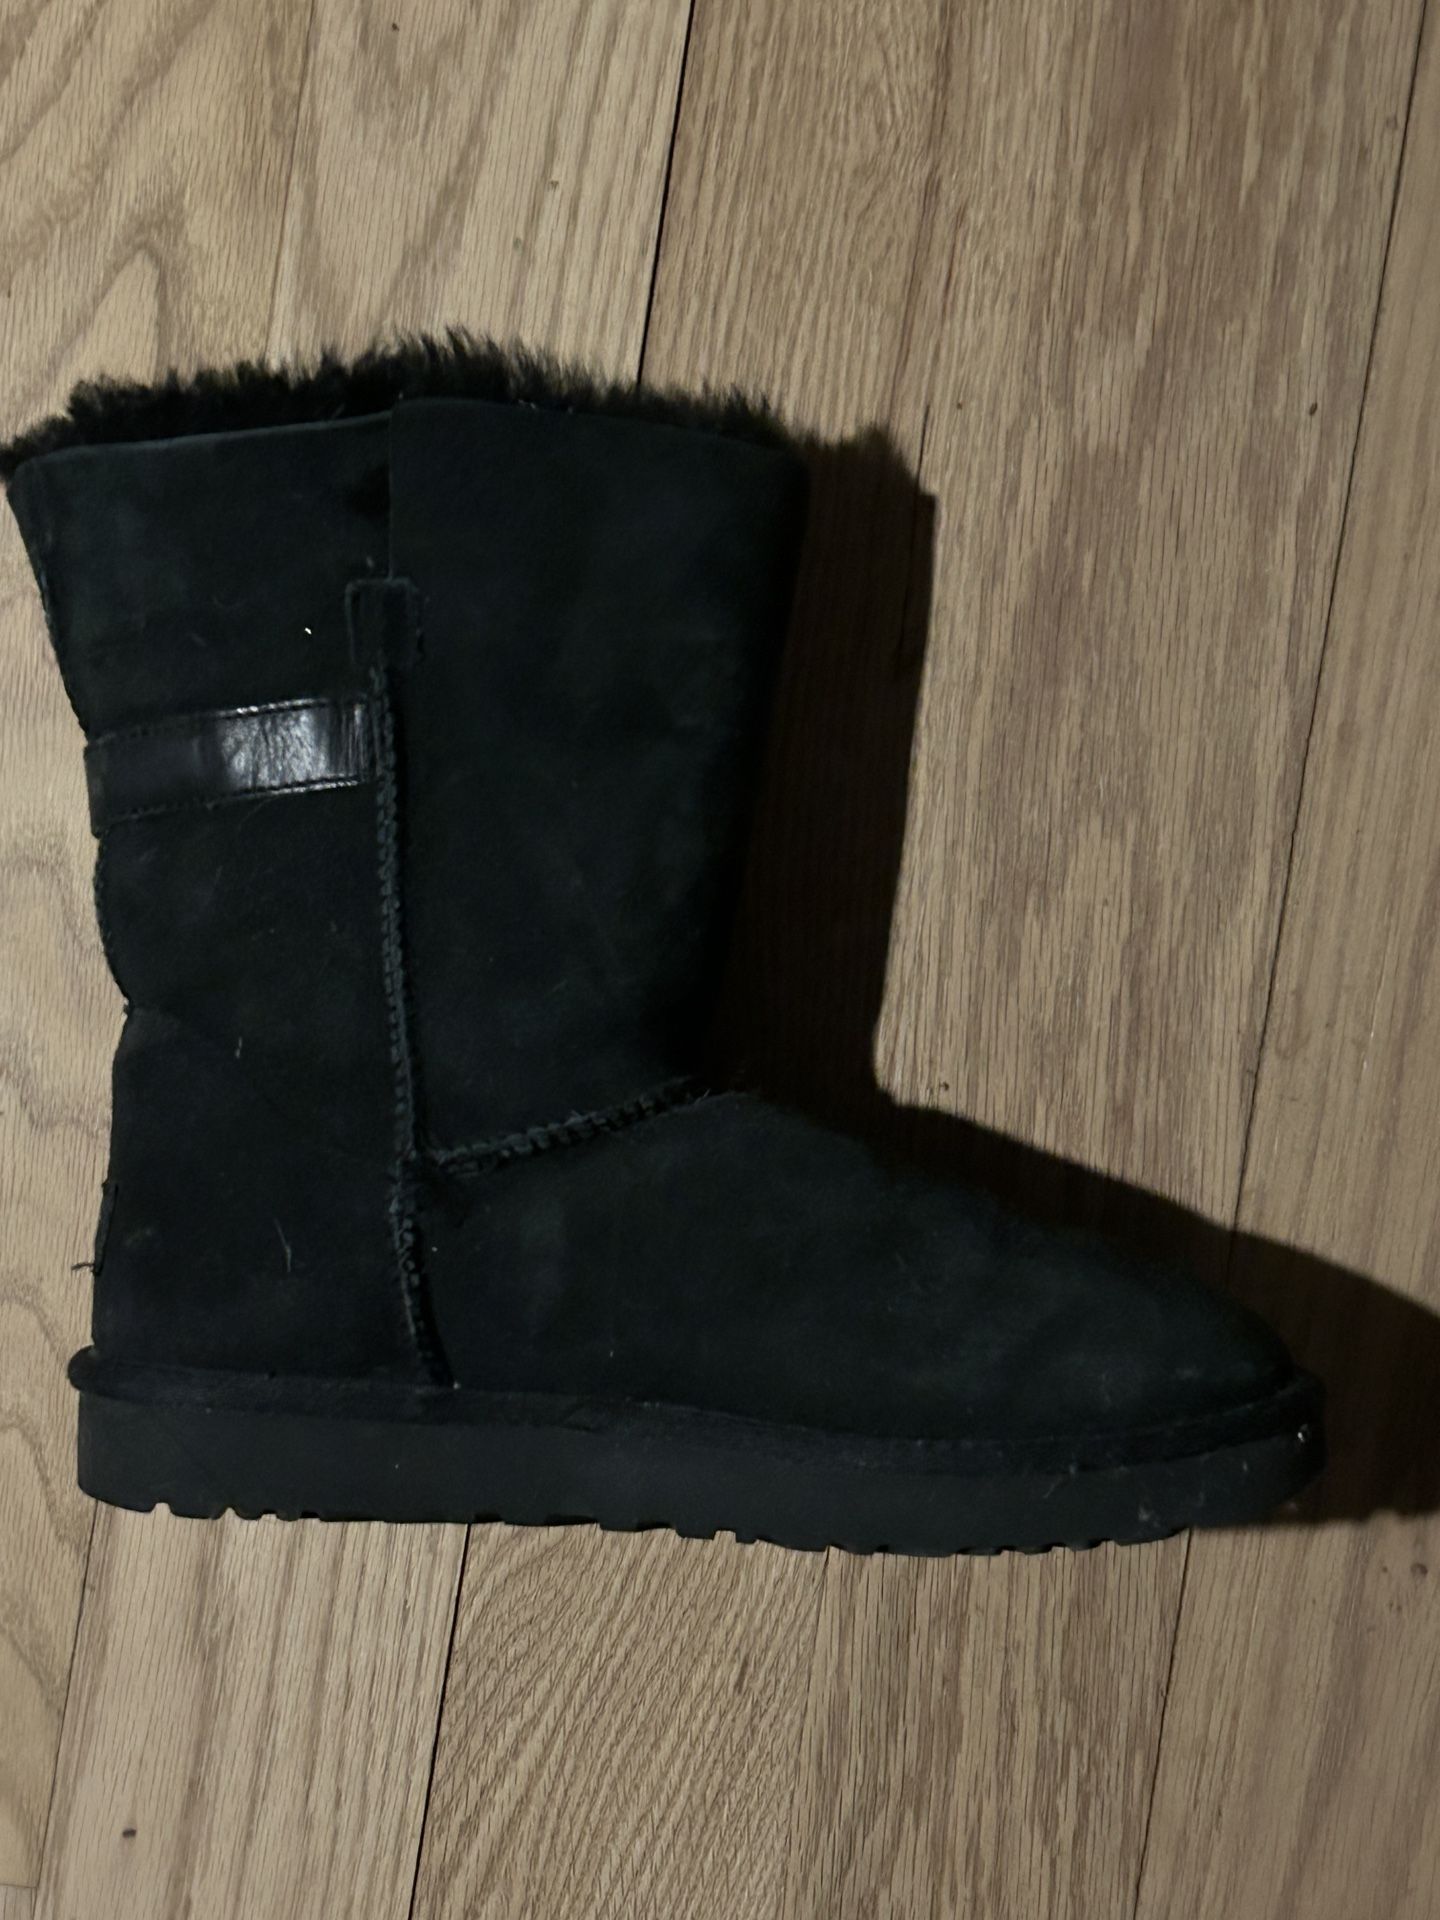 Uggs Size 6 Black Ugg Boots